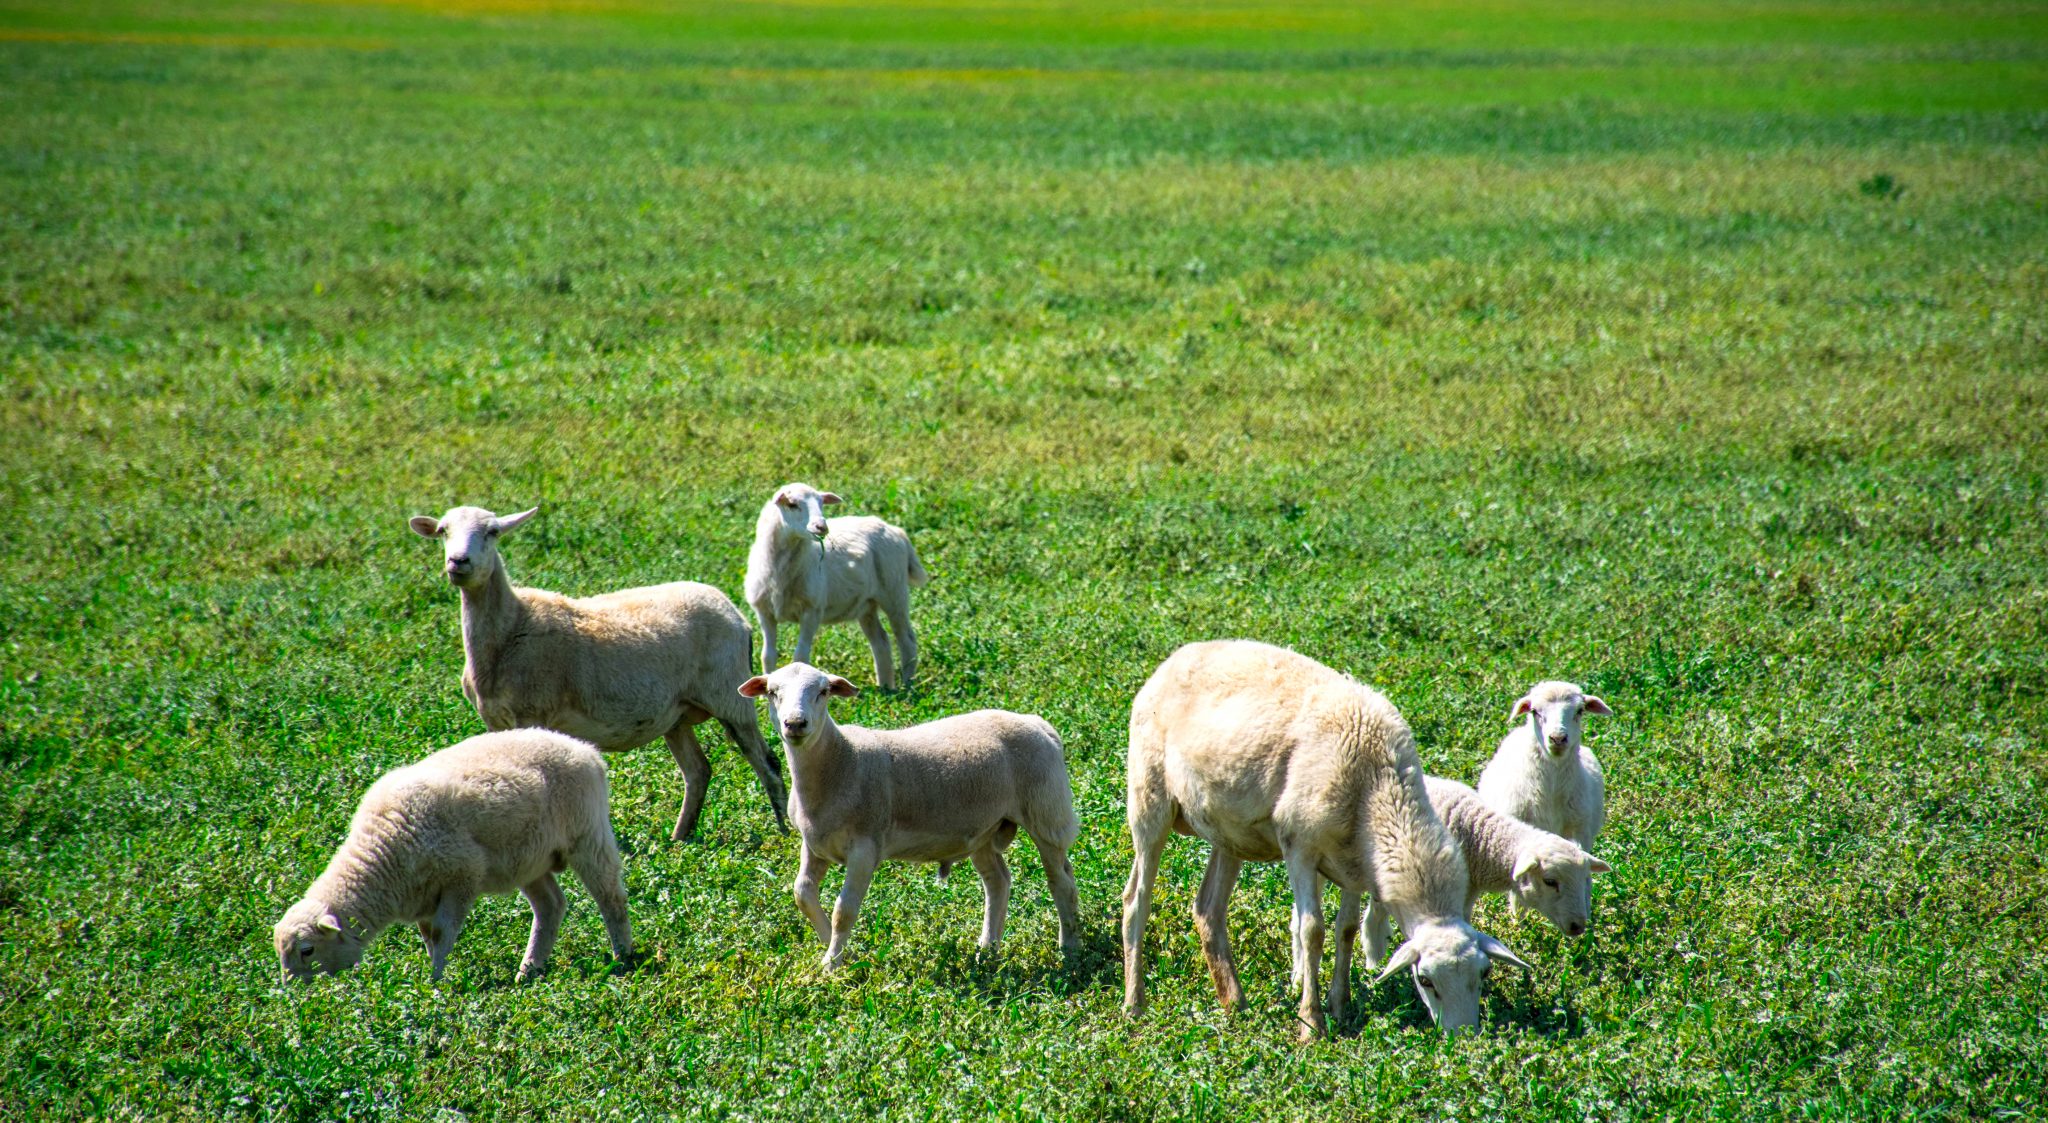 Small family of Sheep on a small family Farm in Central Texas during summer time with green grass to eat and a nice sunny day